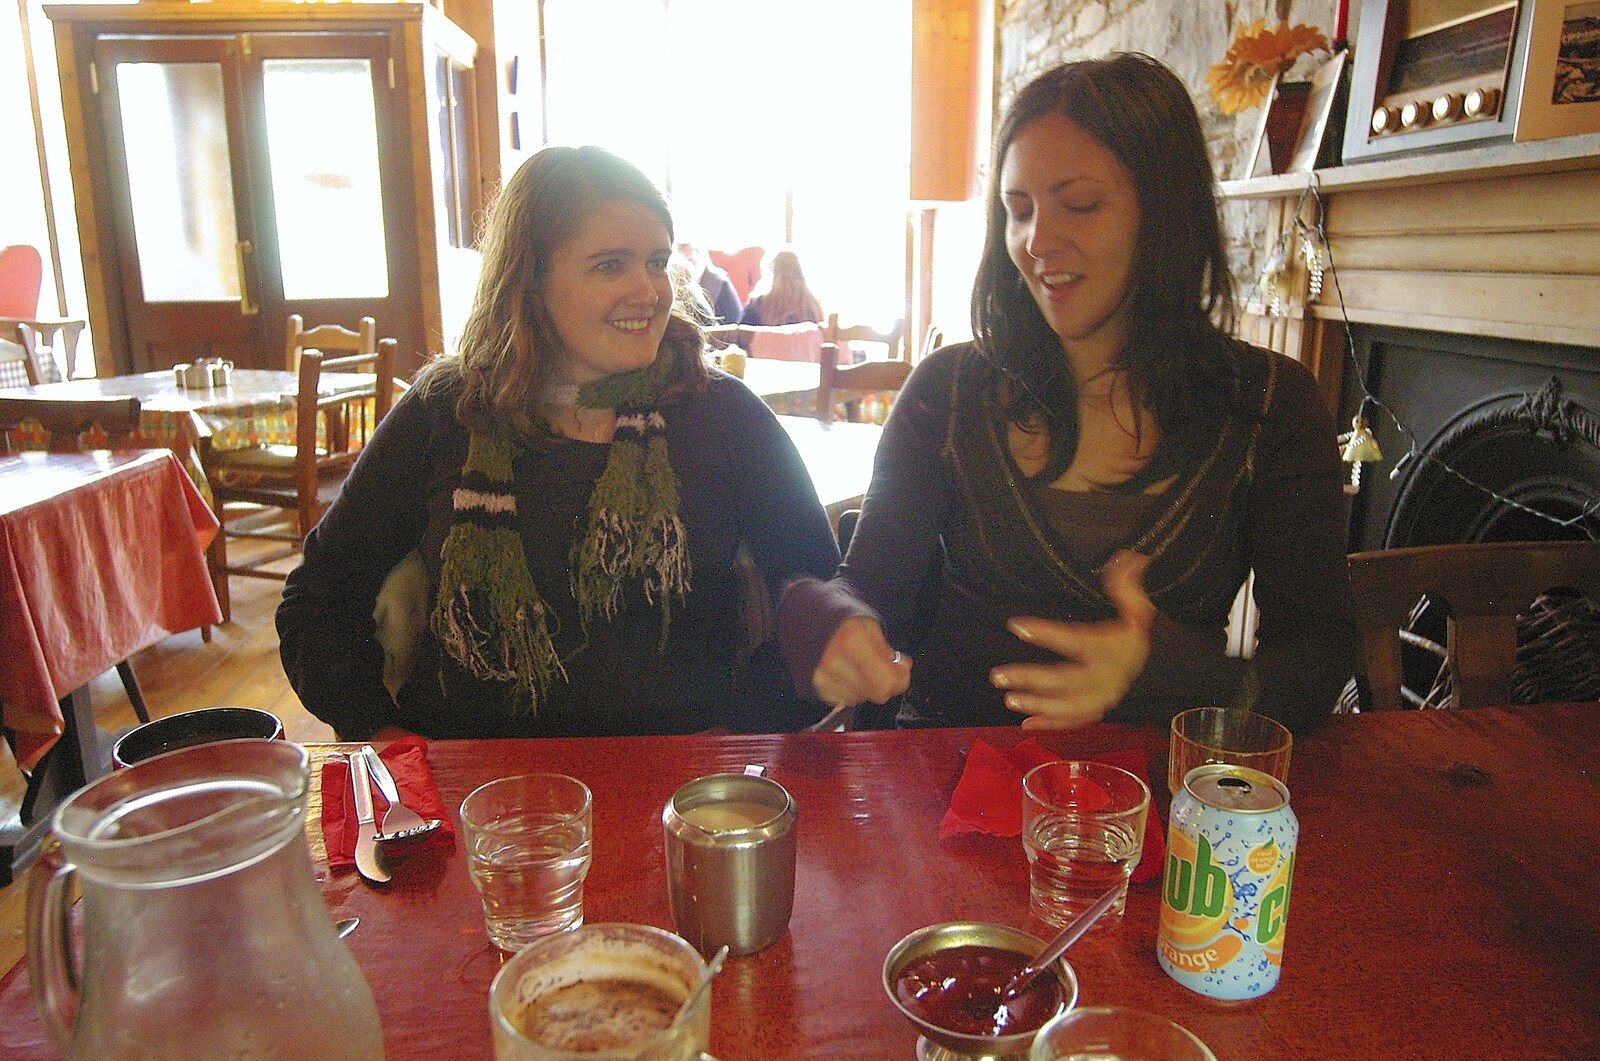 Isobel and Vanessa chat, fed by cans of 'Club Orange' from Corofin, Ennistymon and The Burran, County Clare, Western Ireland - 27th October 2006